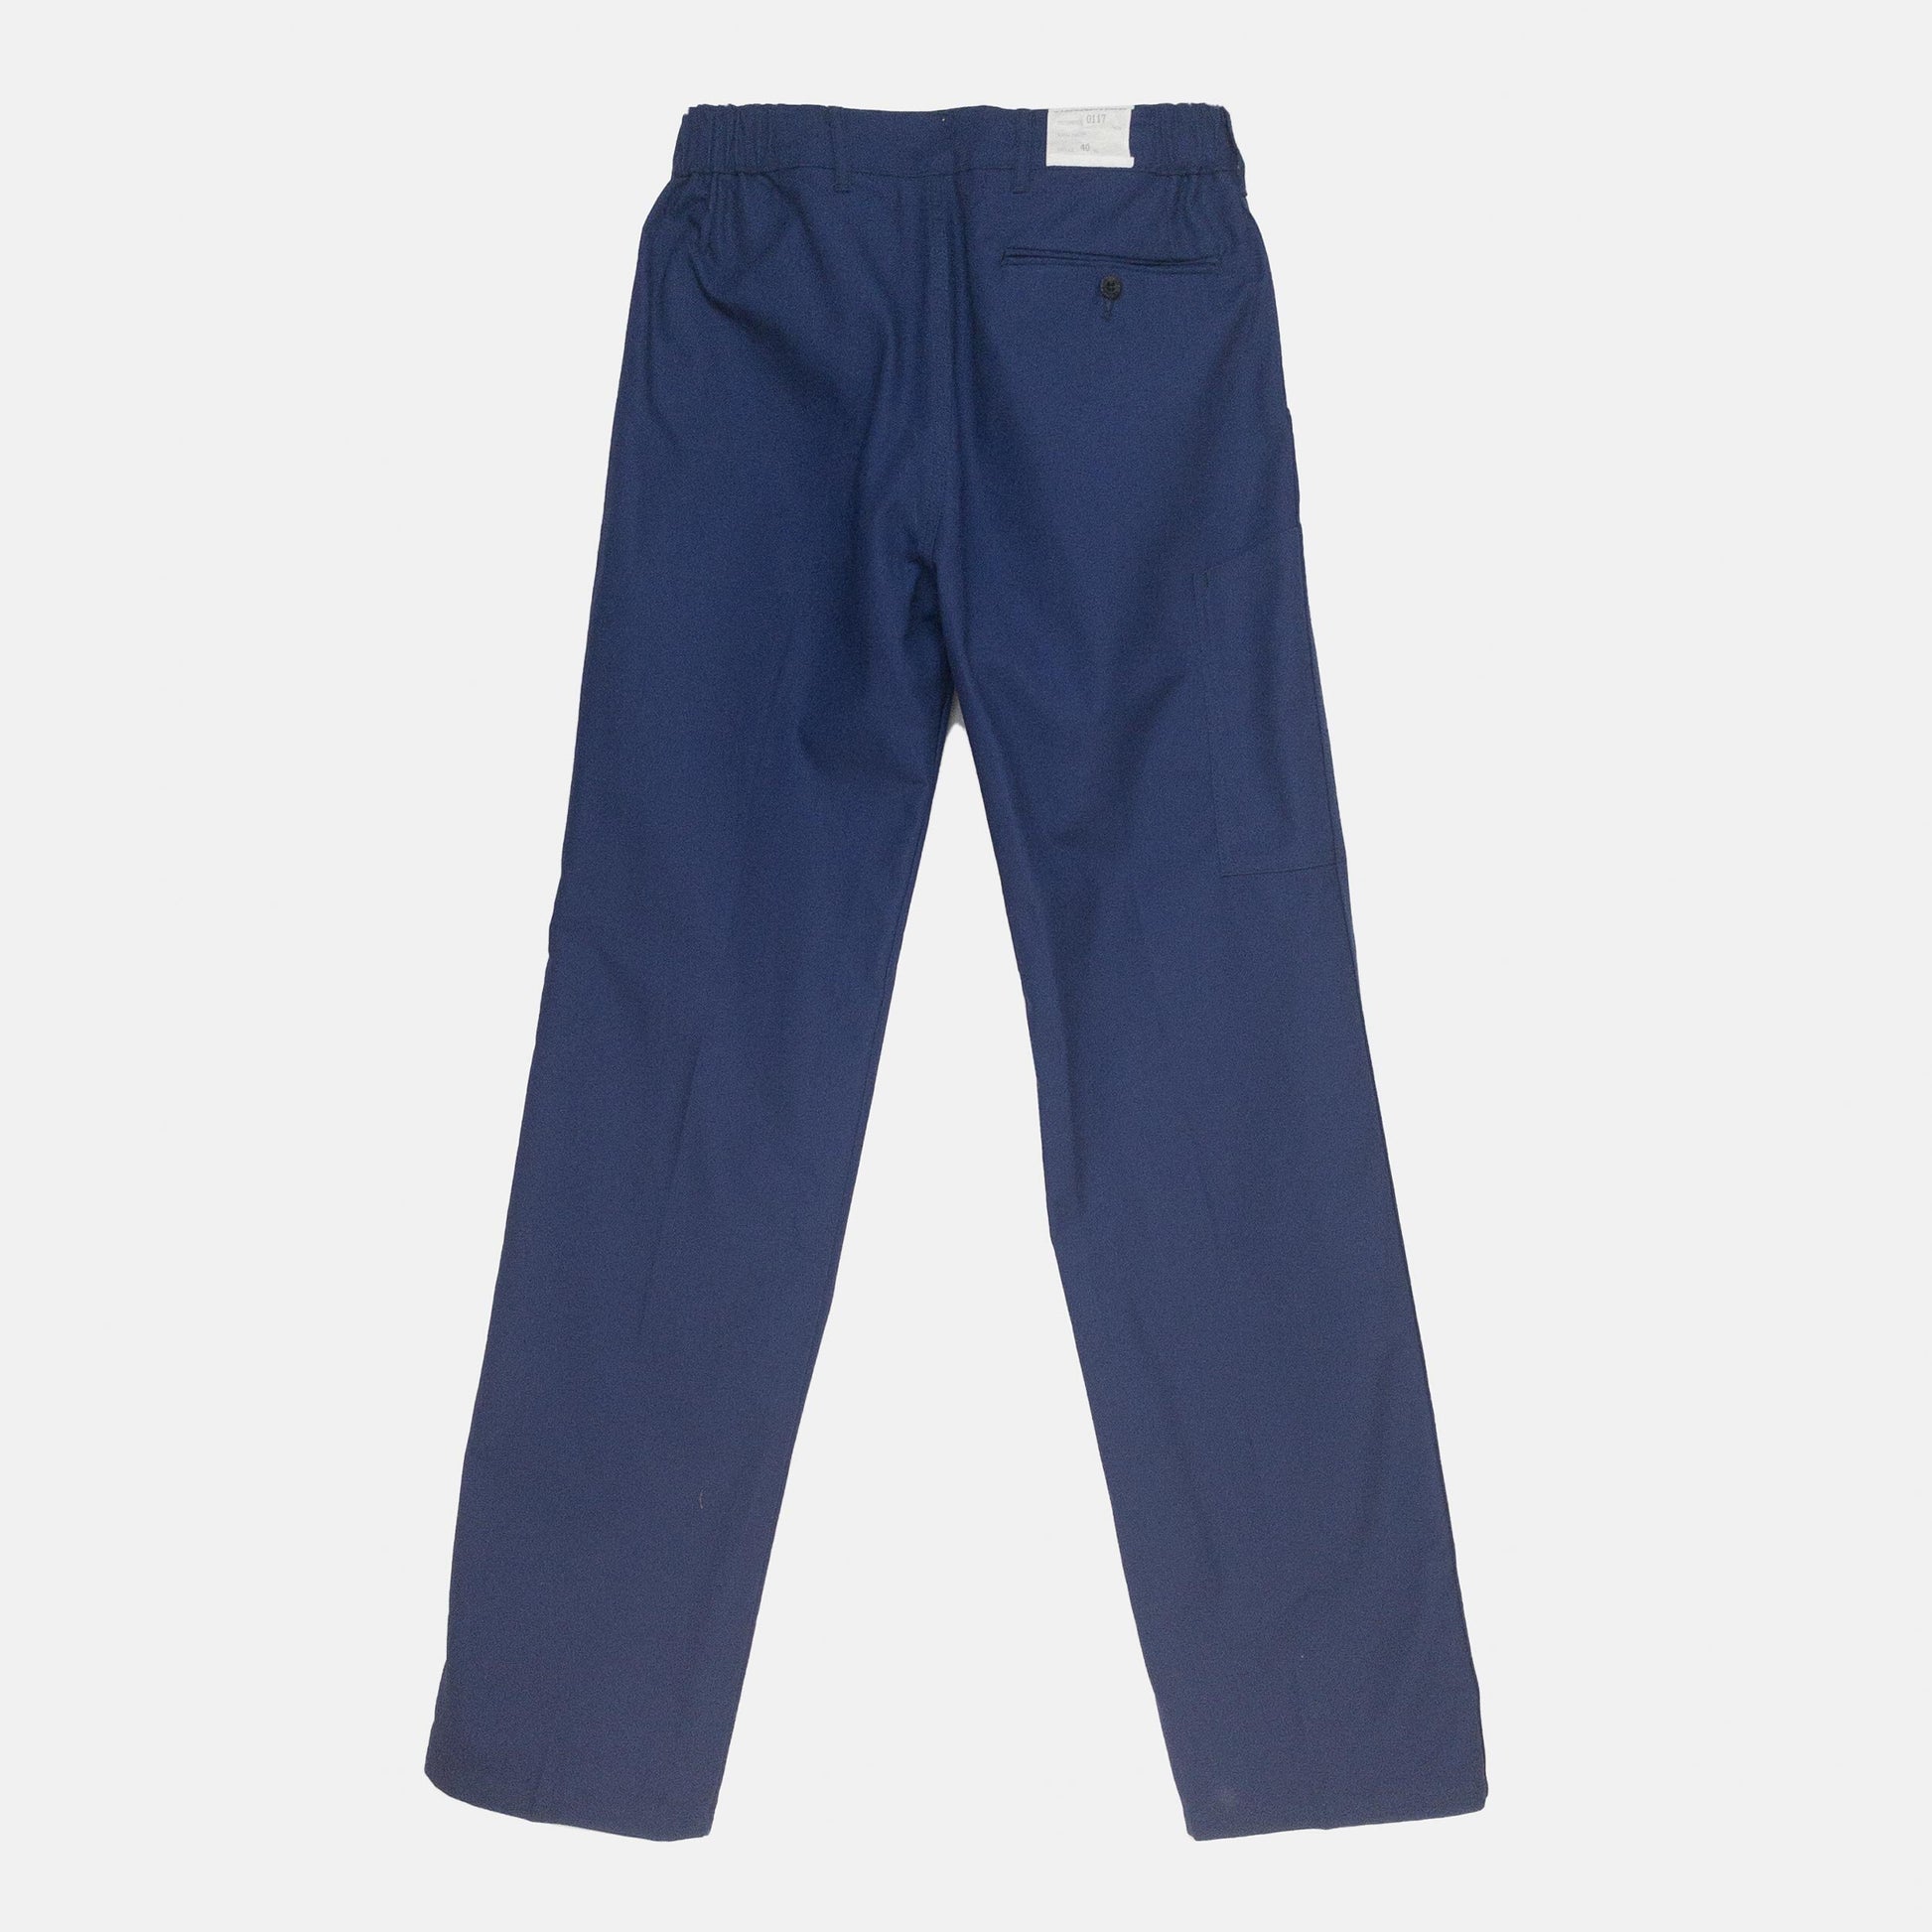 Le Laboureur French Cotton Work Pant in Navy